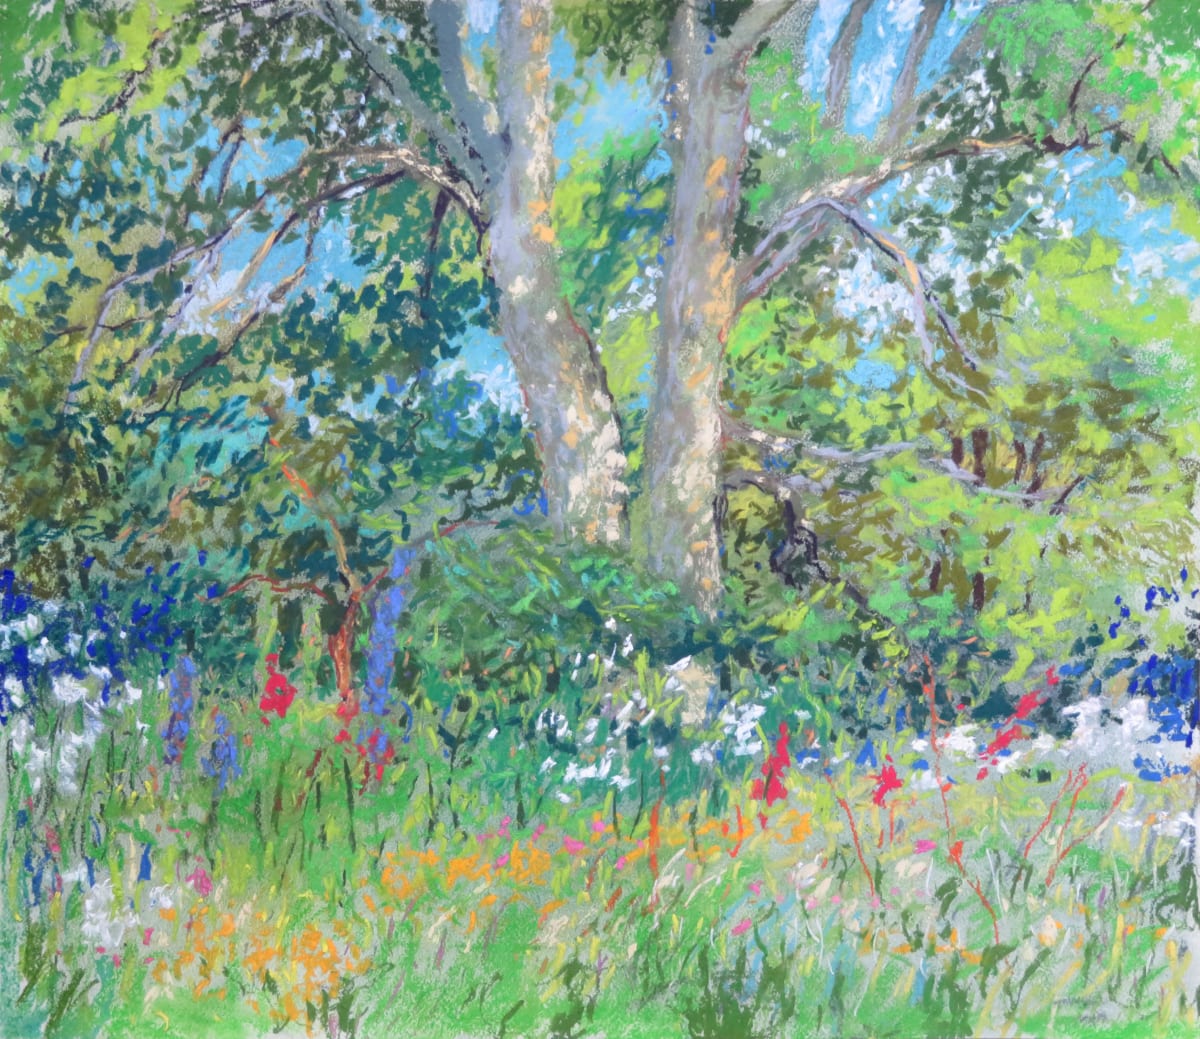 LS60: Majestic Sycamore with wild flowers beneath - 21st July 2020 